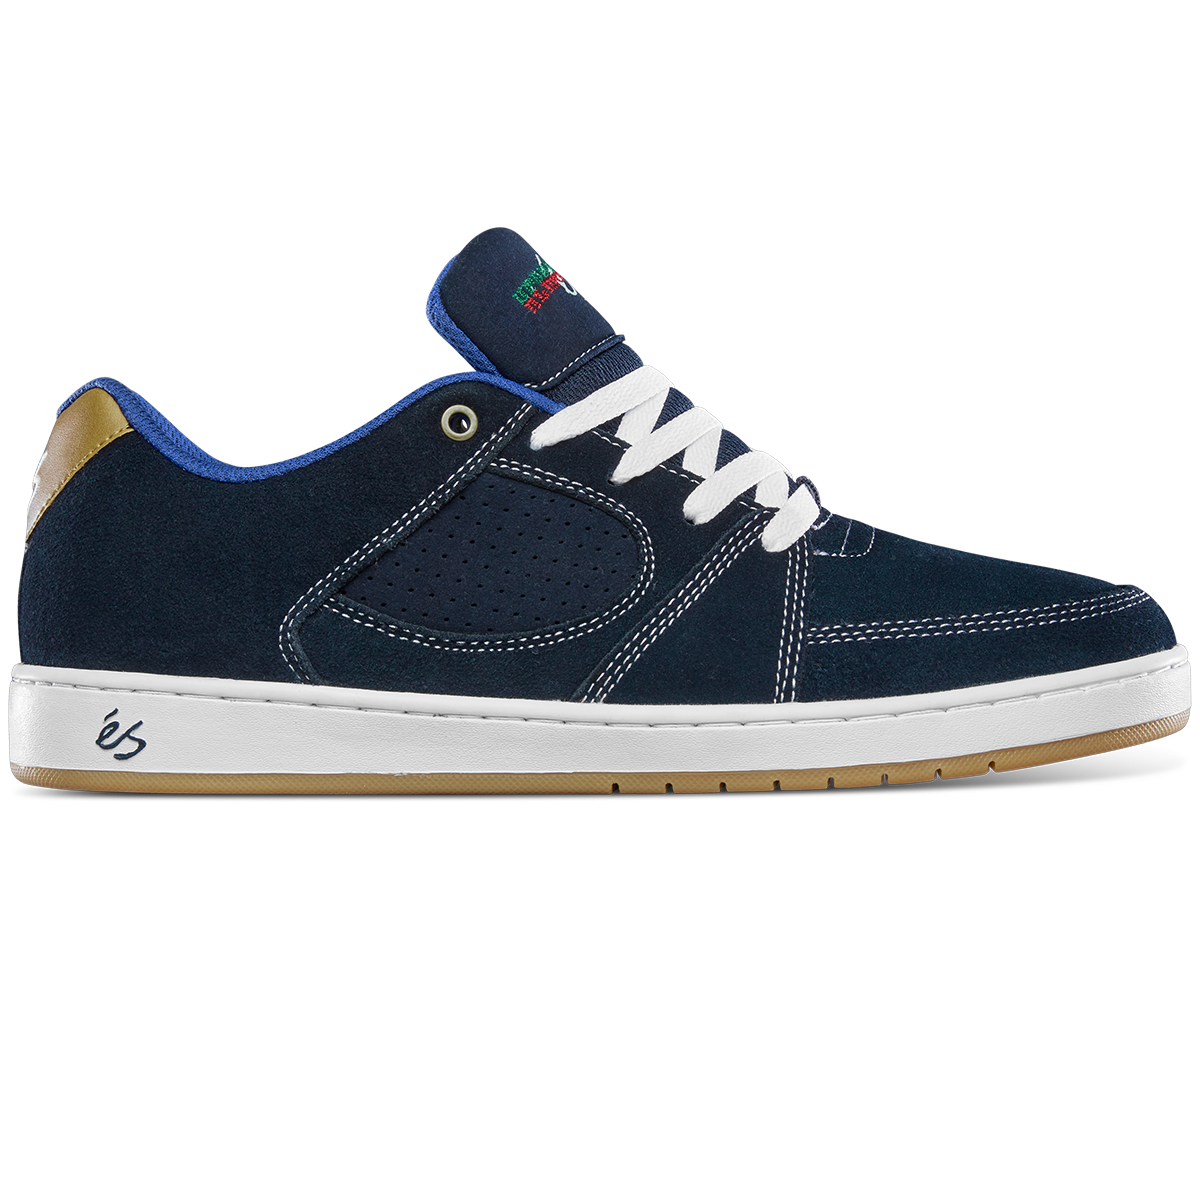 eS Accel Slim Shoes - Navy/White/Red image 1